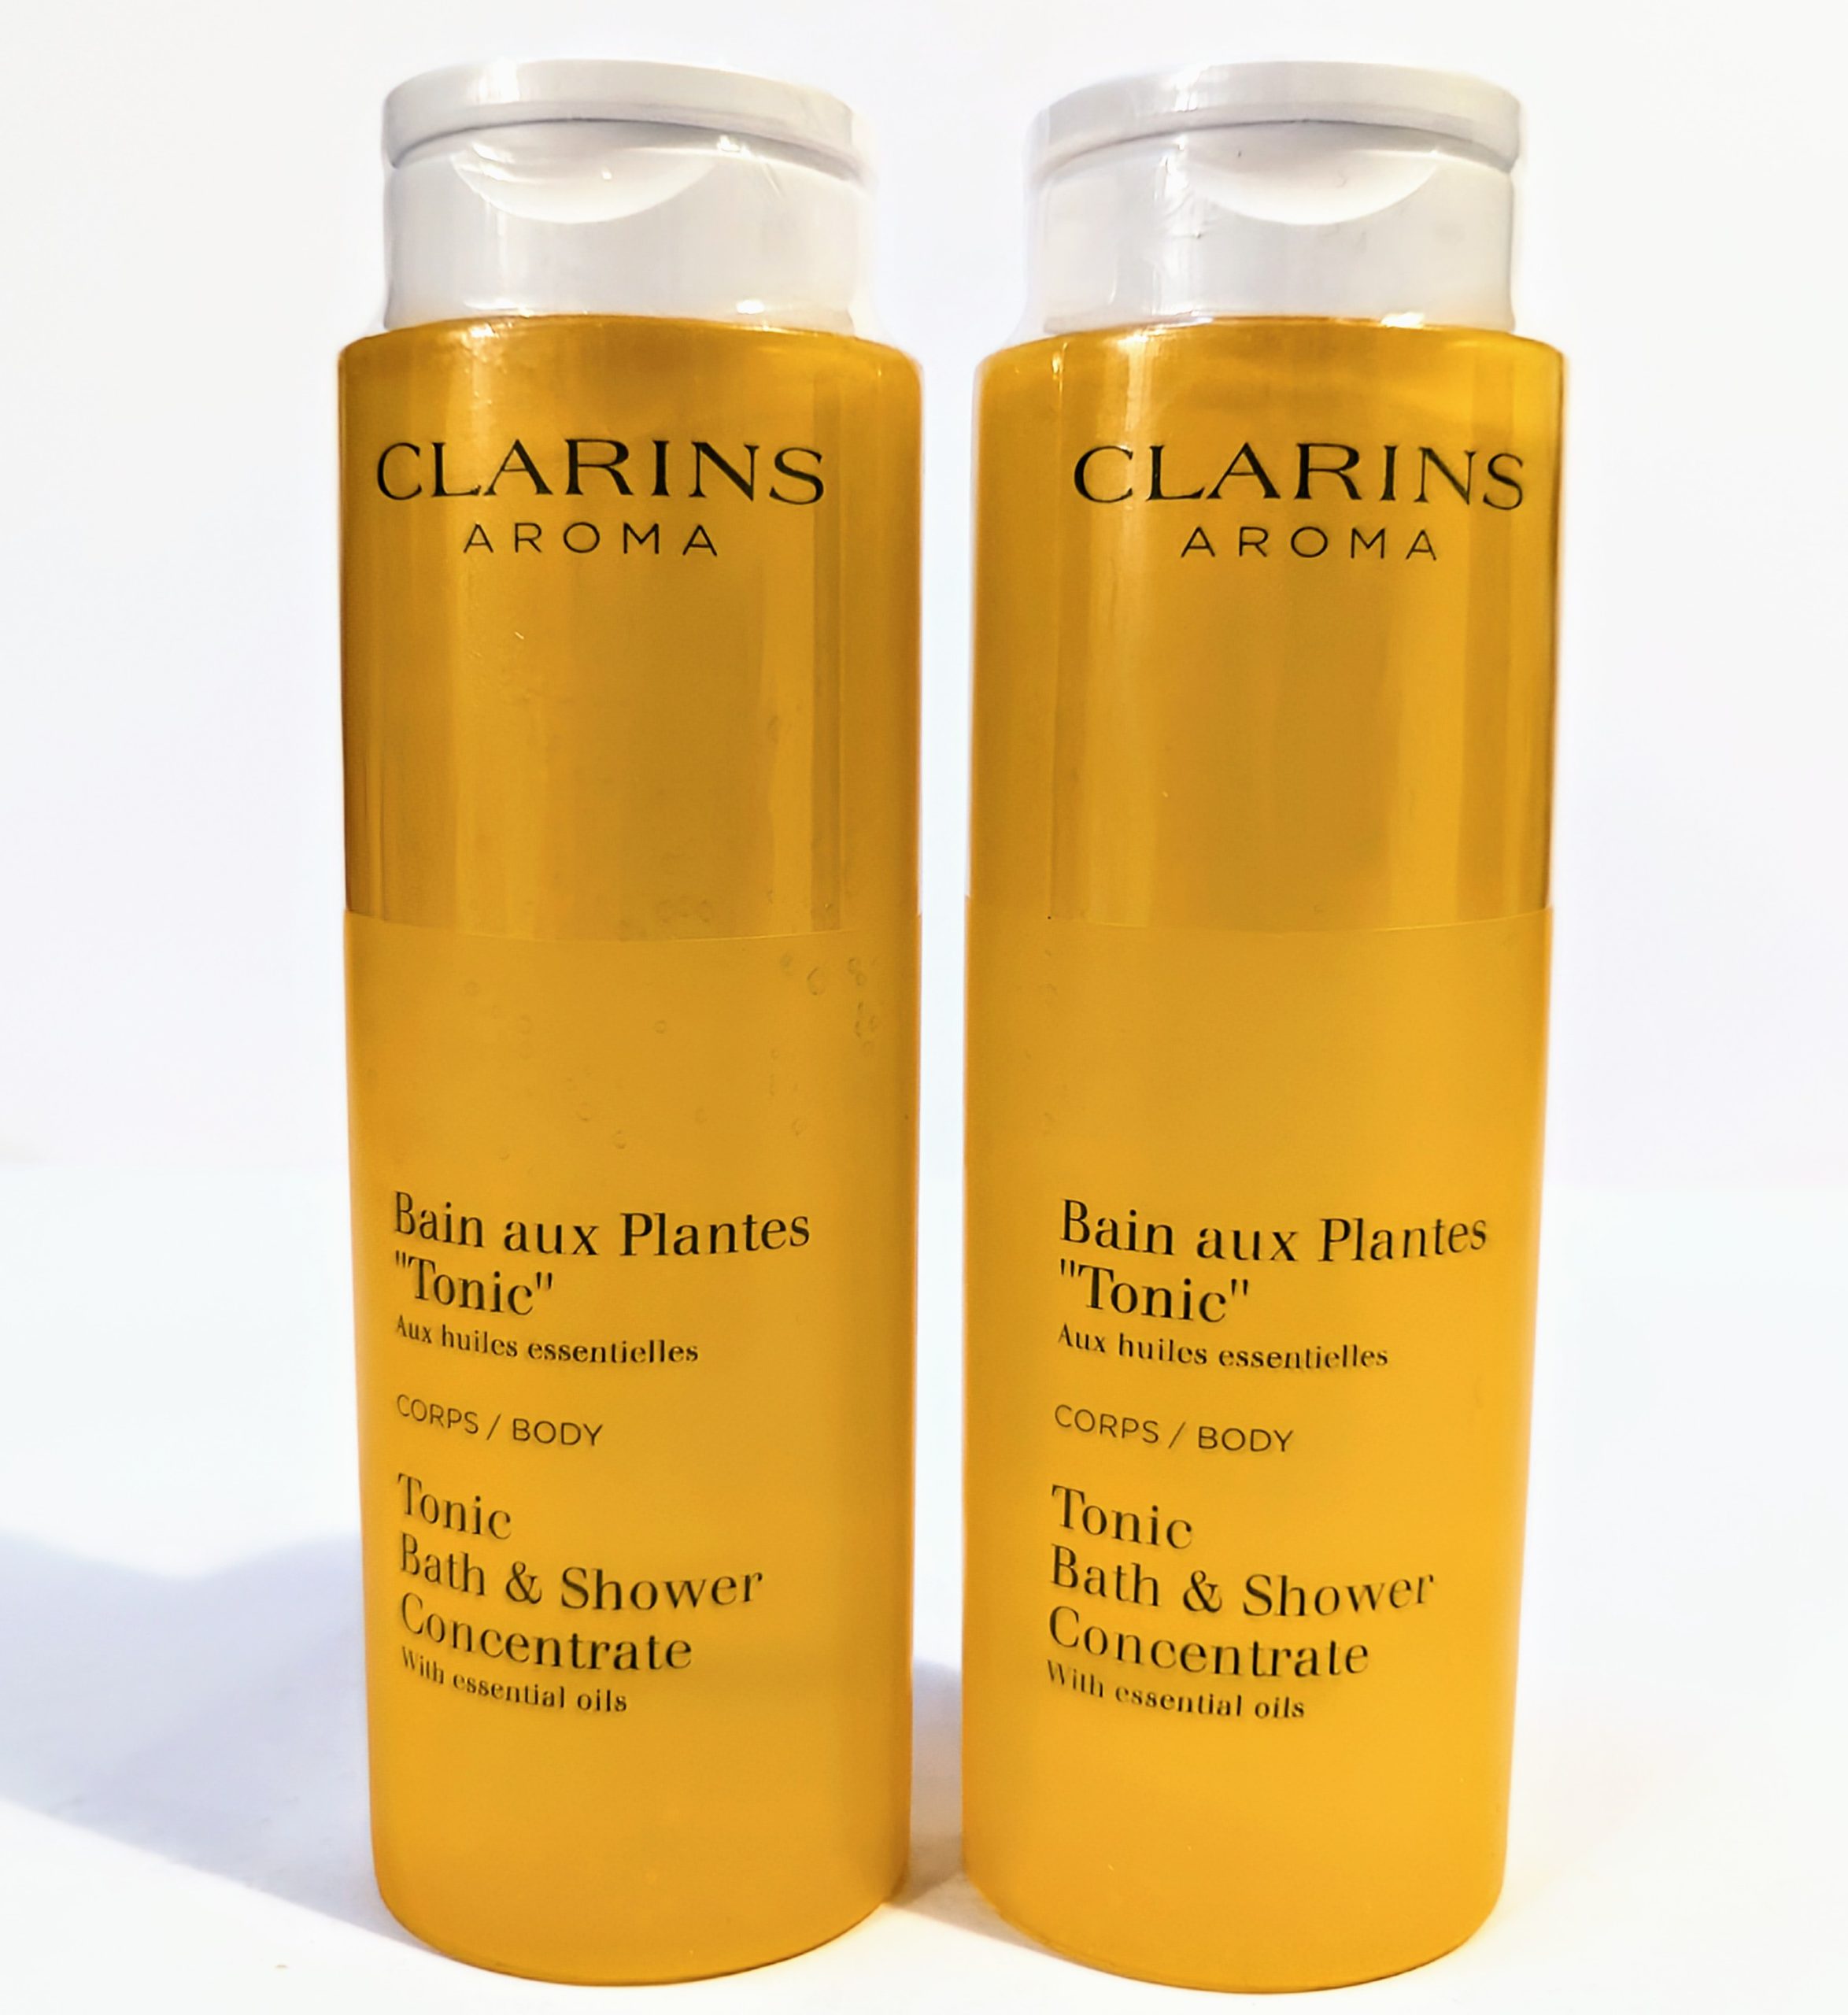 Two yellow bottles of Clarins Aroma Bath and Shower Concentrate with essential oils, labeled “Bain aux Plantes ‘Tonic'” for body usage, each with a clear flip-top cap.